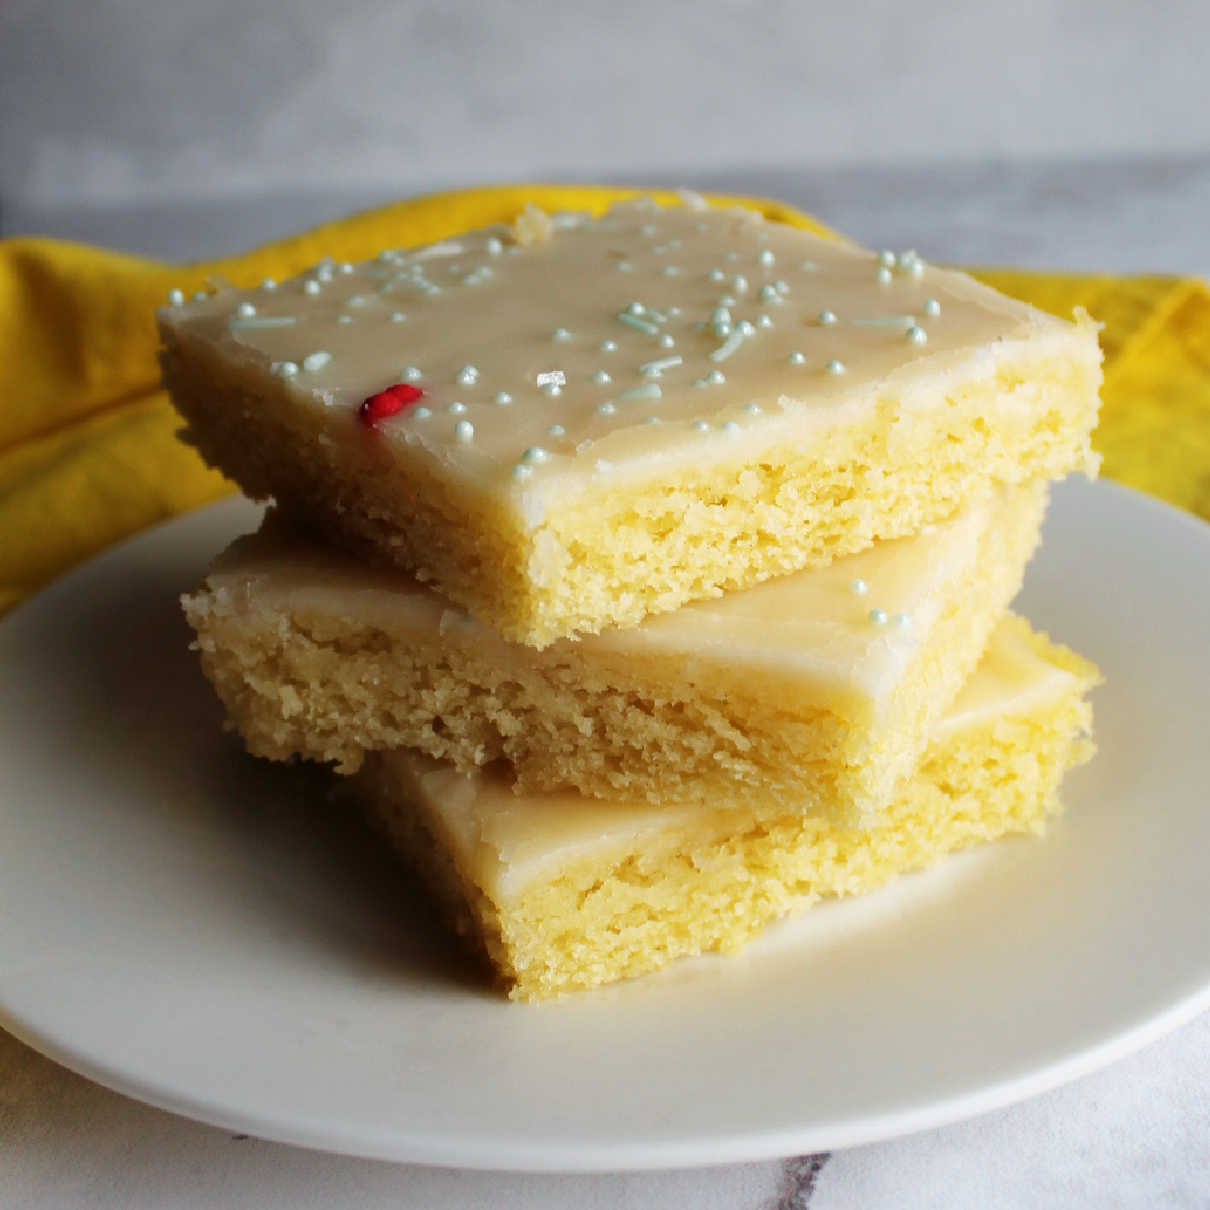 Stack of slices of lemon Texas sheet cake with smooth icing and sprinkles on top.